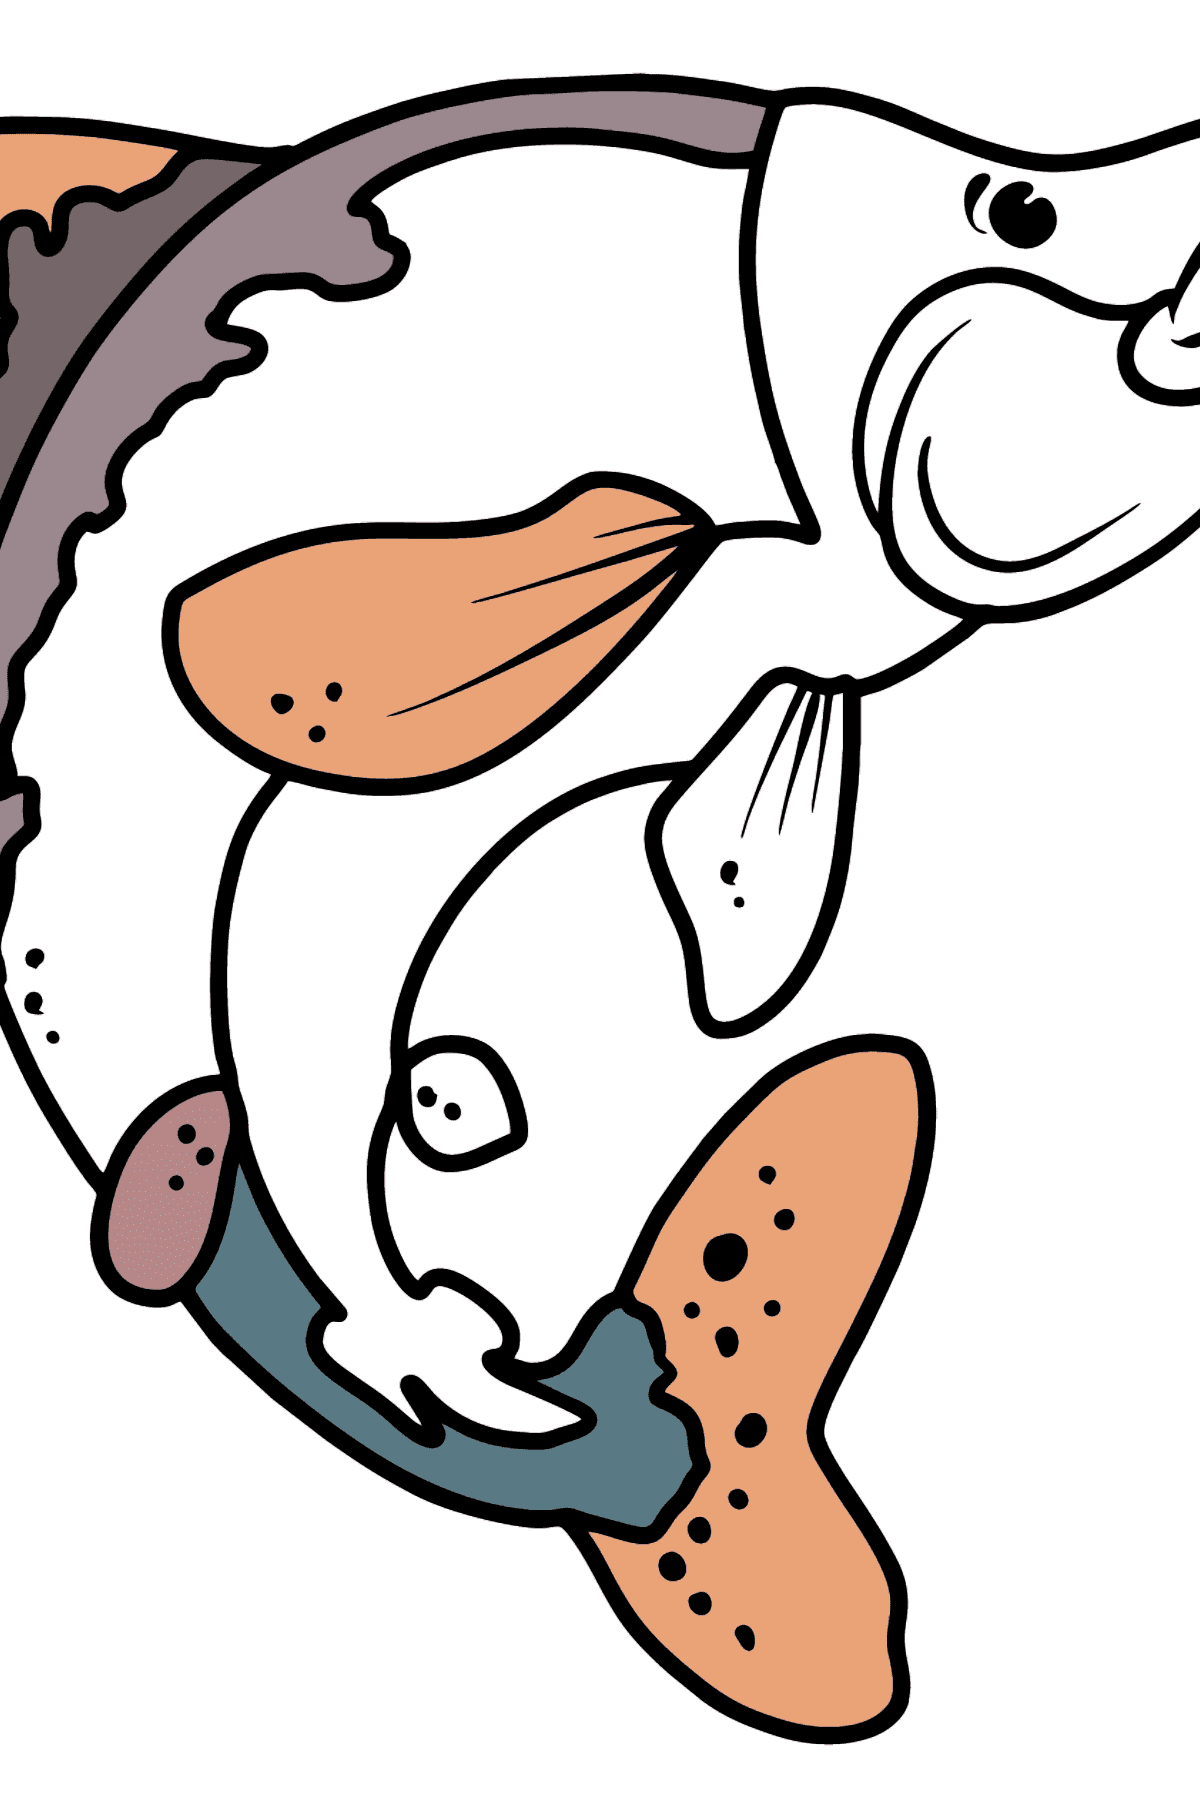 Salmon coloring page - Coloring Pages for Kids